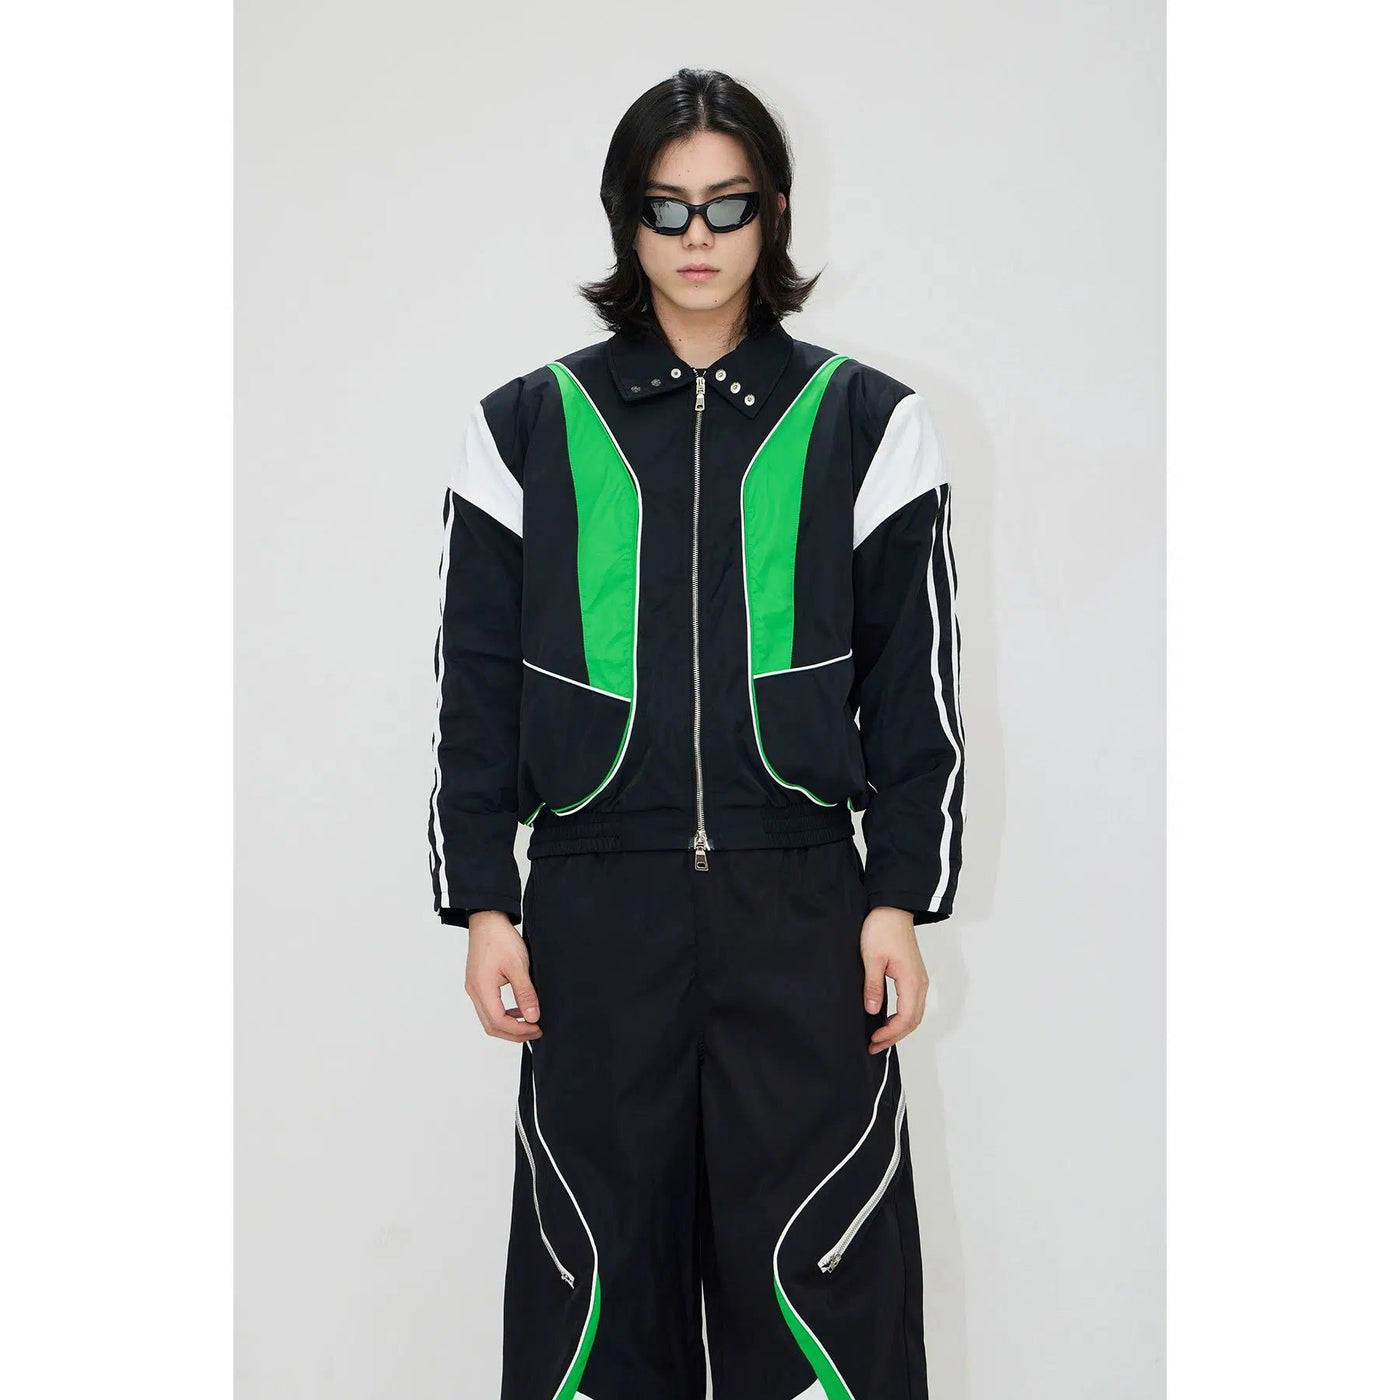 Futuristic Contrast Jacket & Track Pants Set Korean Street Fashion Clothing Set By PeopleStyle Shop Online at OH Vault